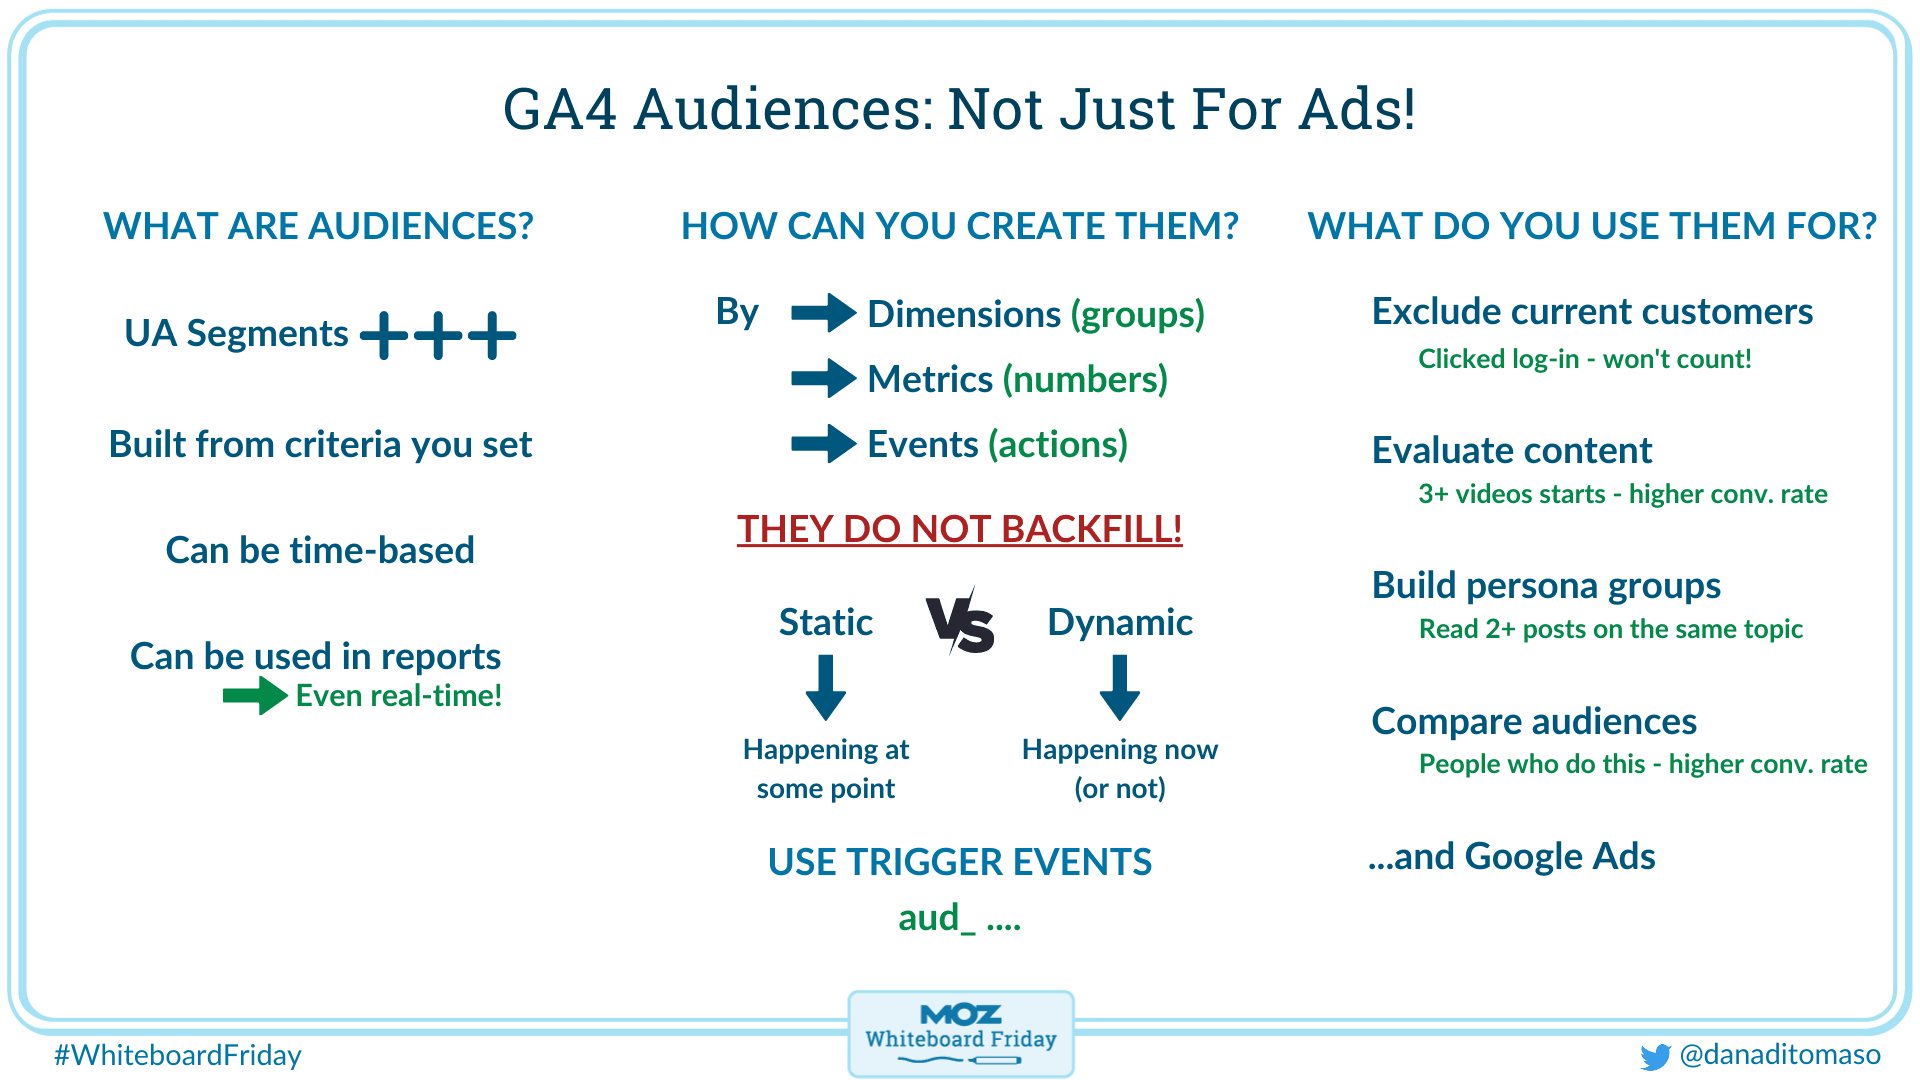 ga4-audiences-not-just-for-ads-whiteboard-friday